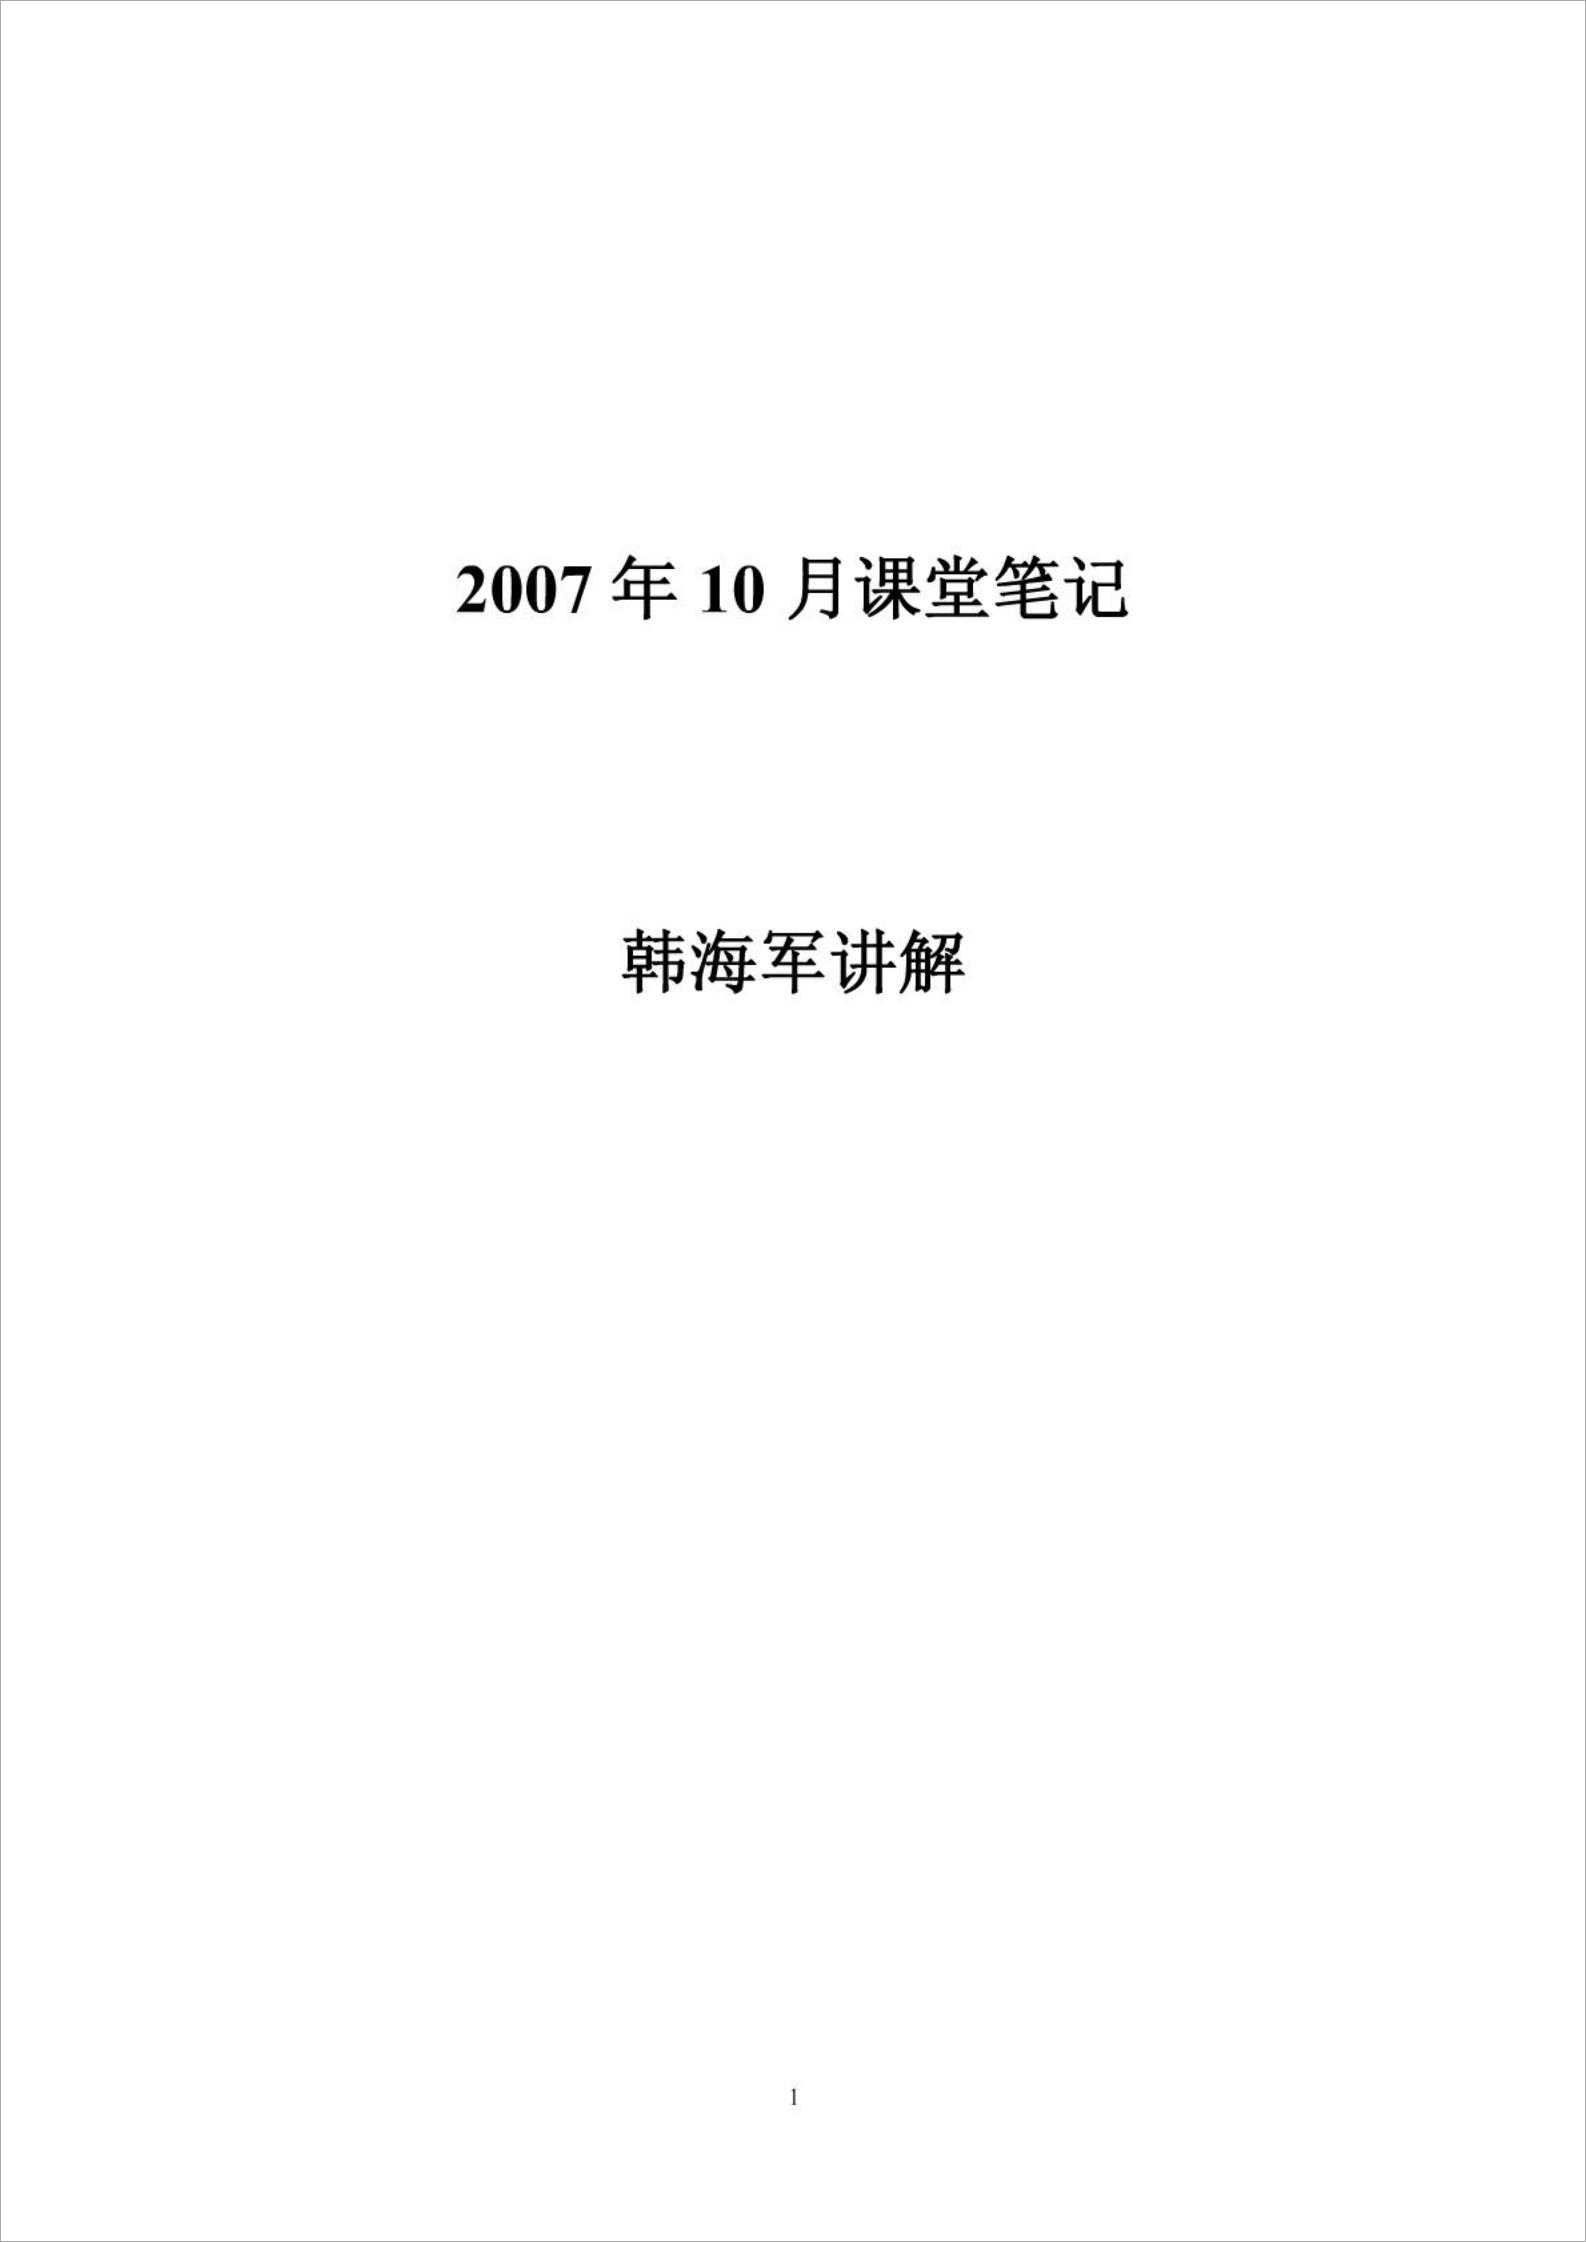 Han Navy October 2007 Lecture Notes 2.pdf